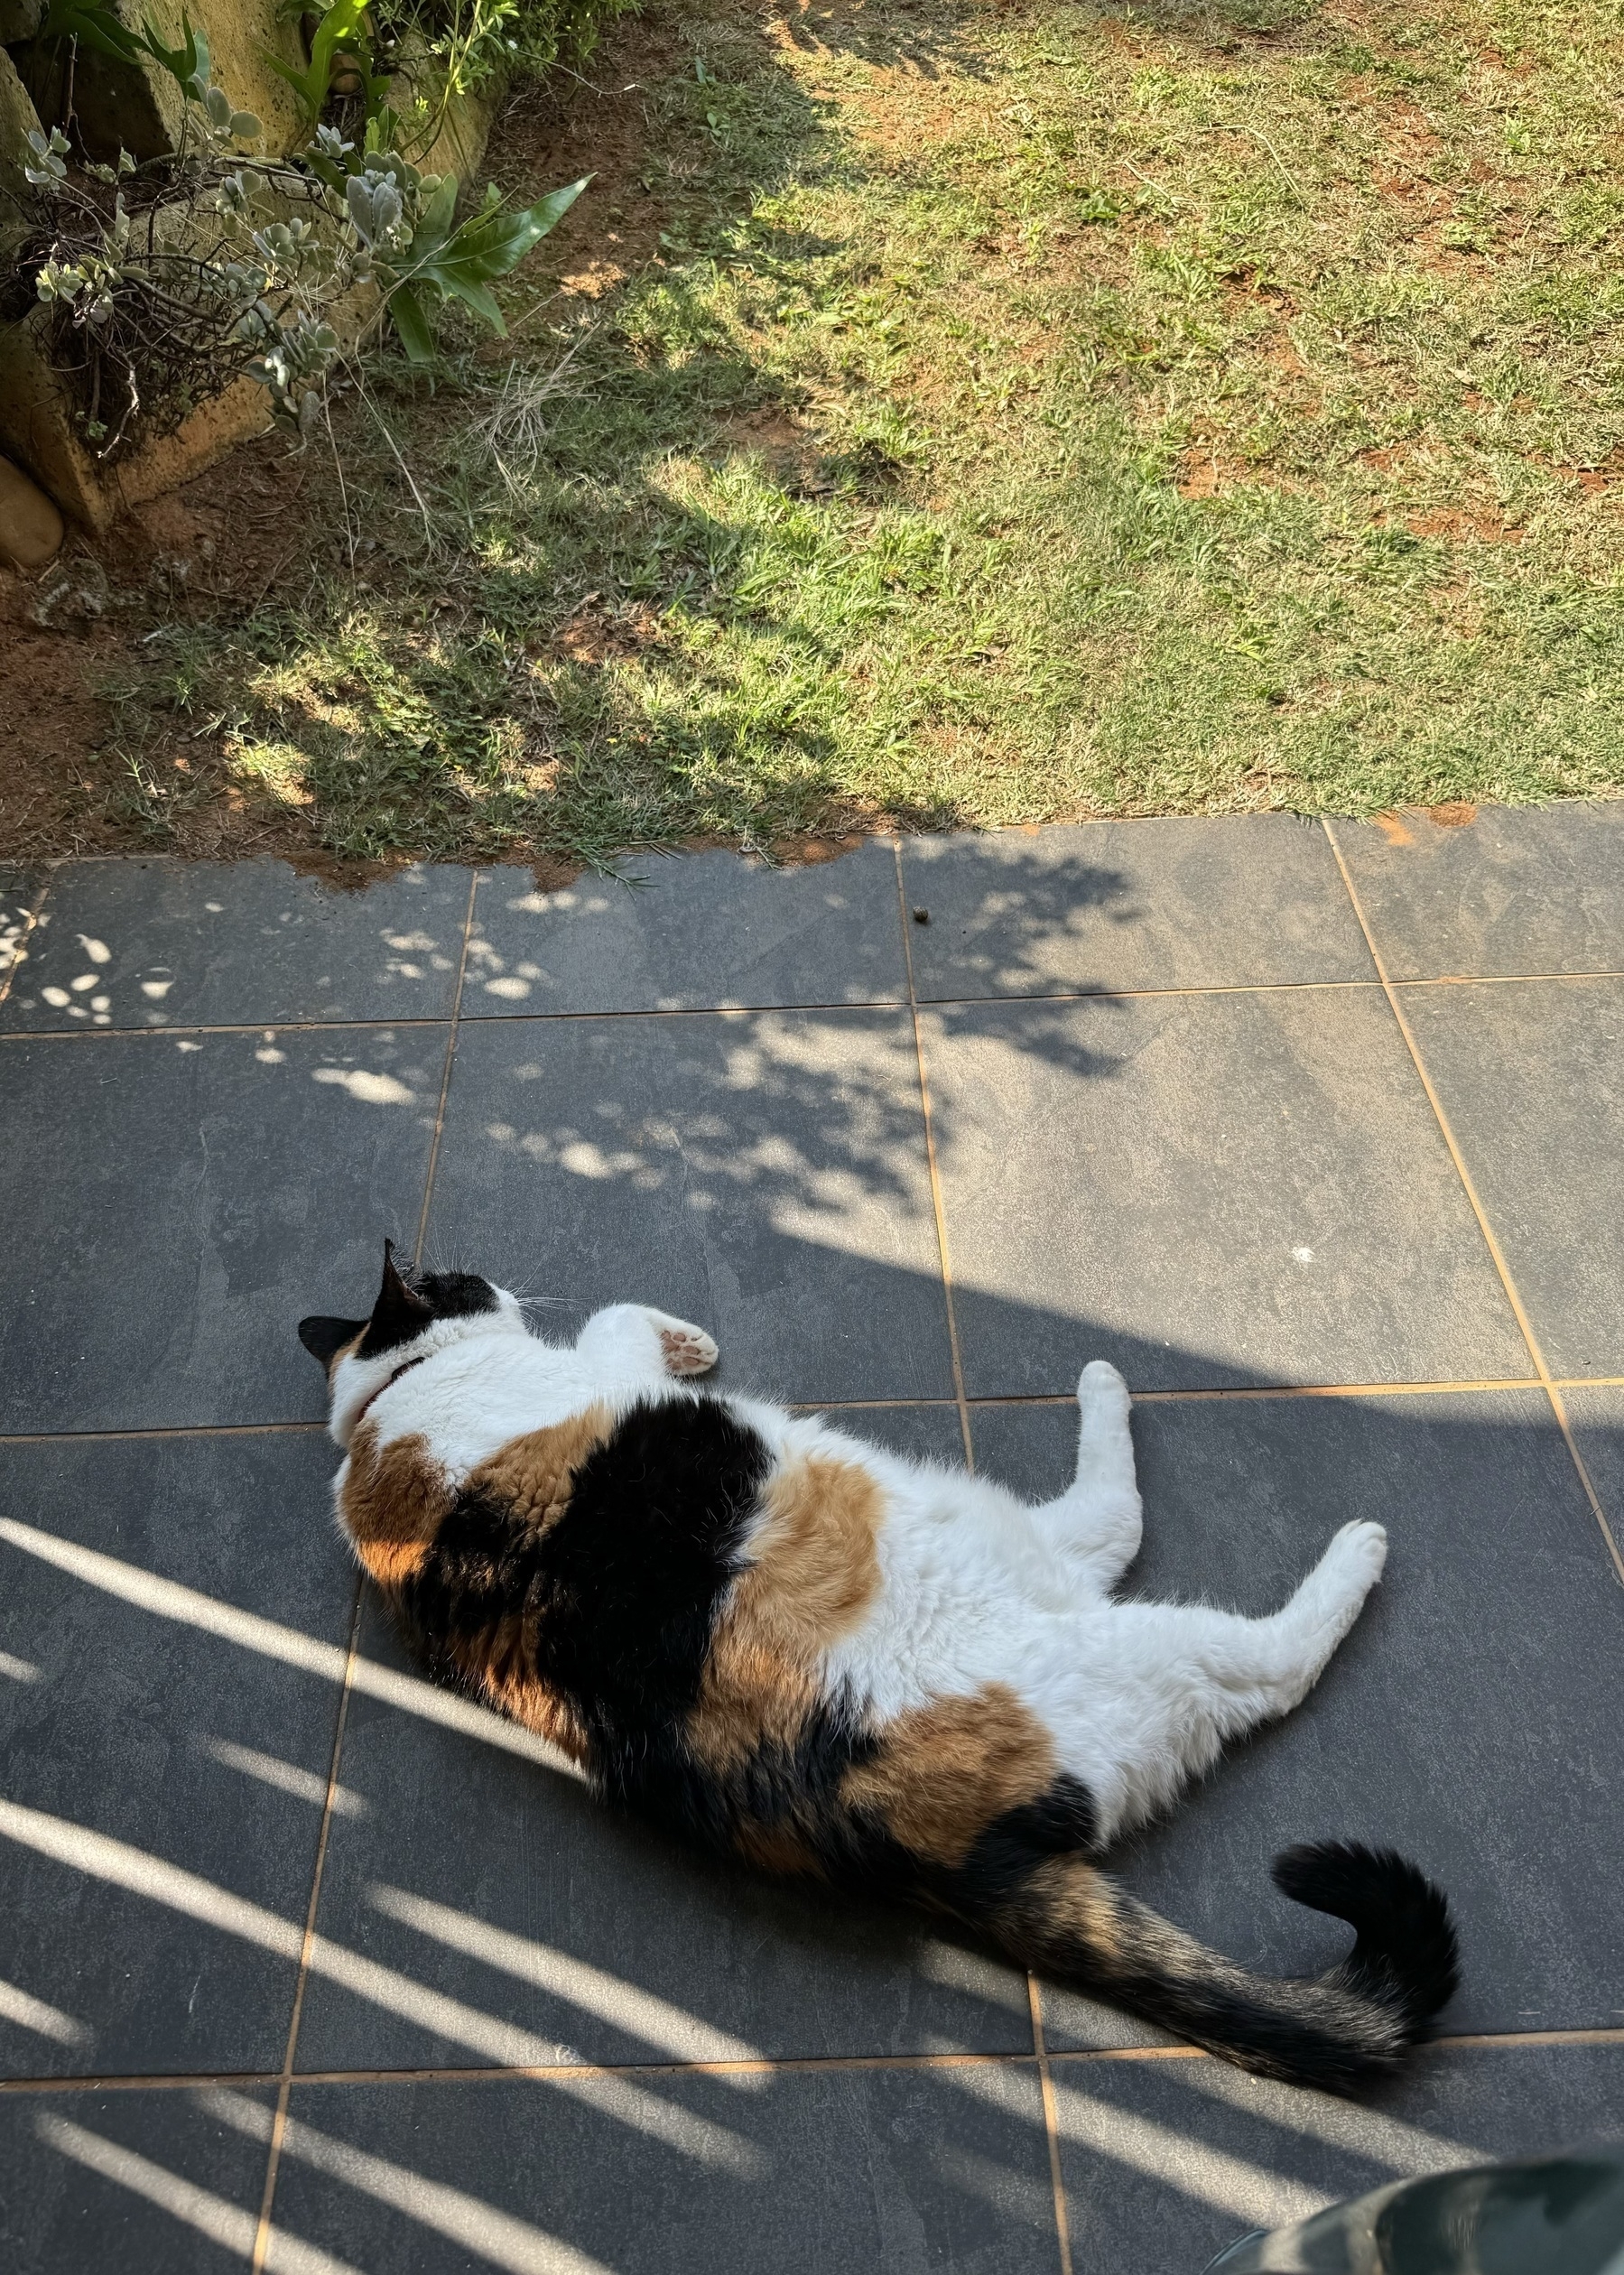 A cat napping on a patio.